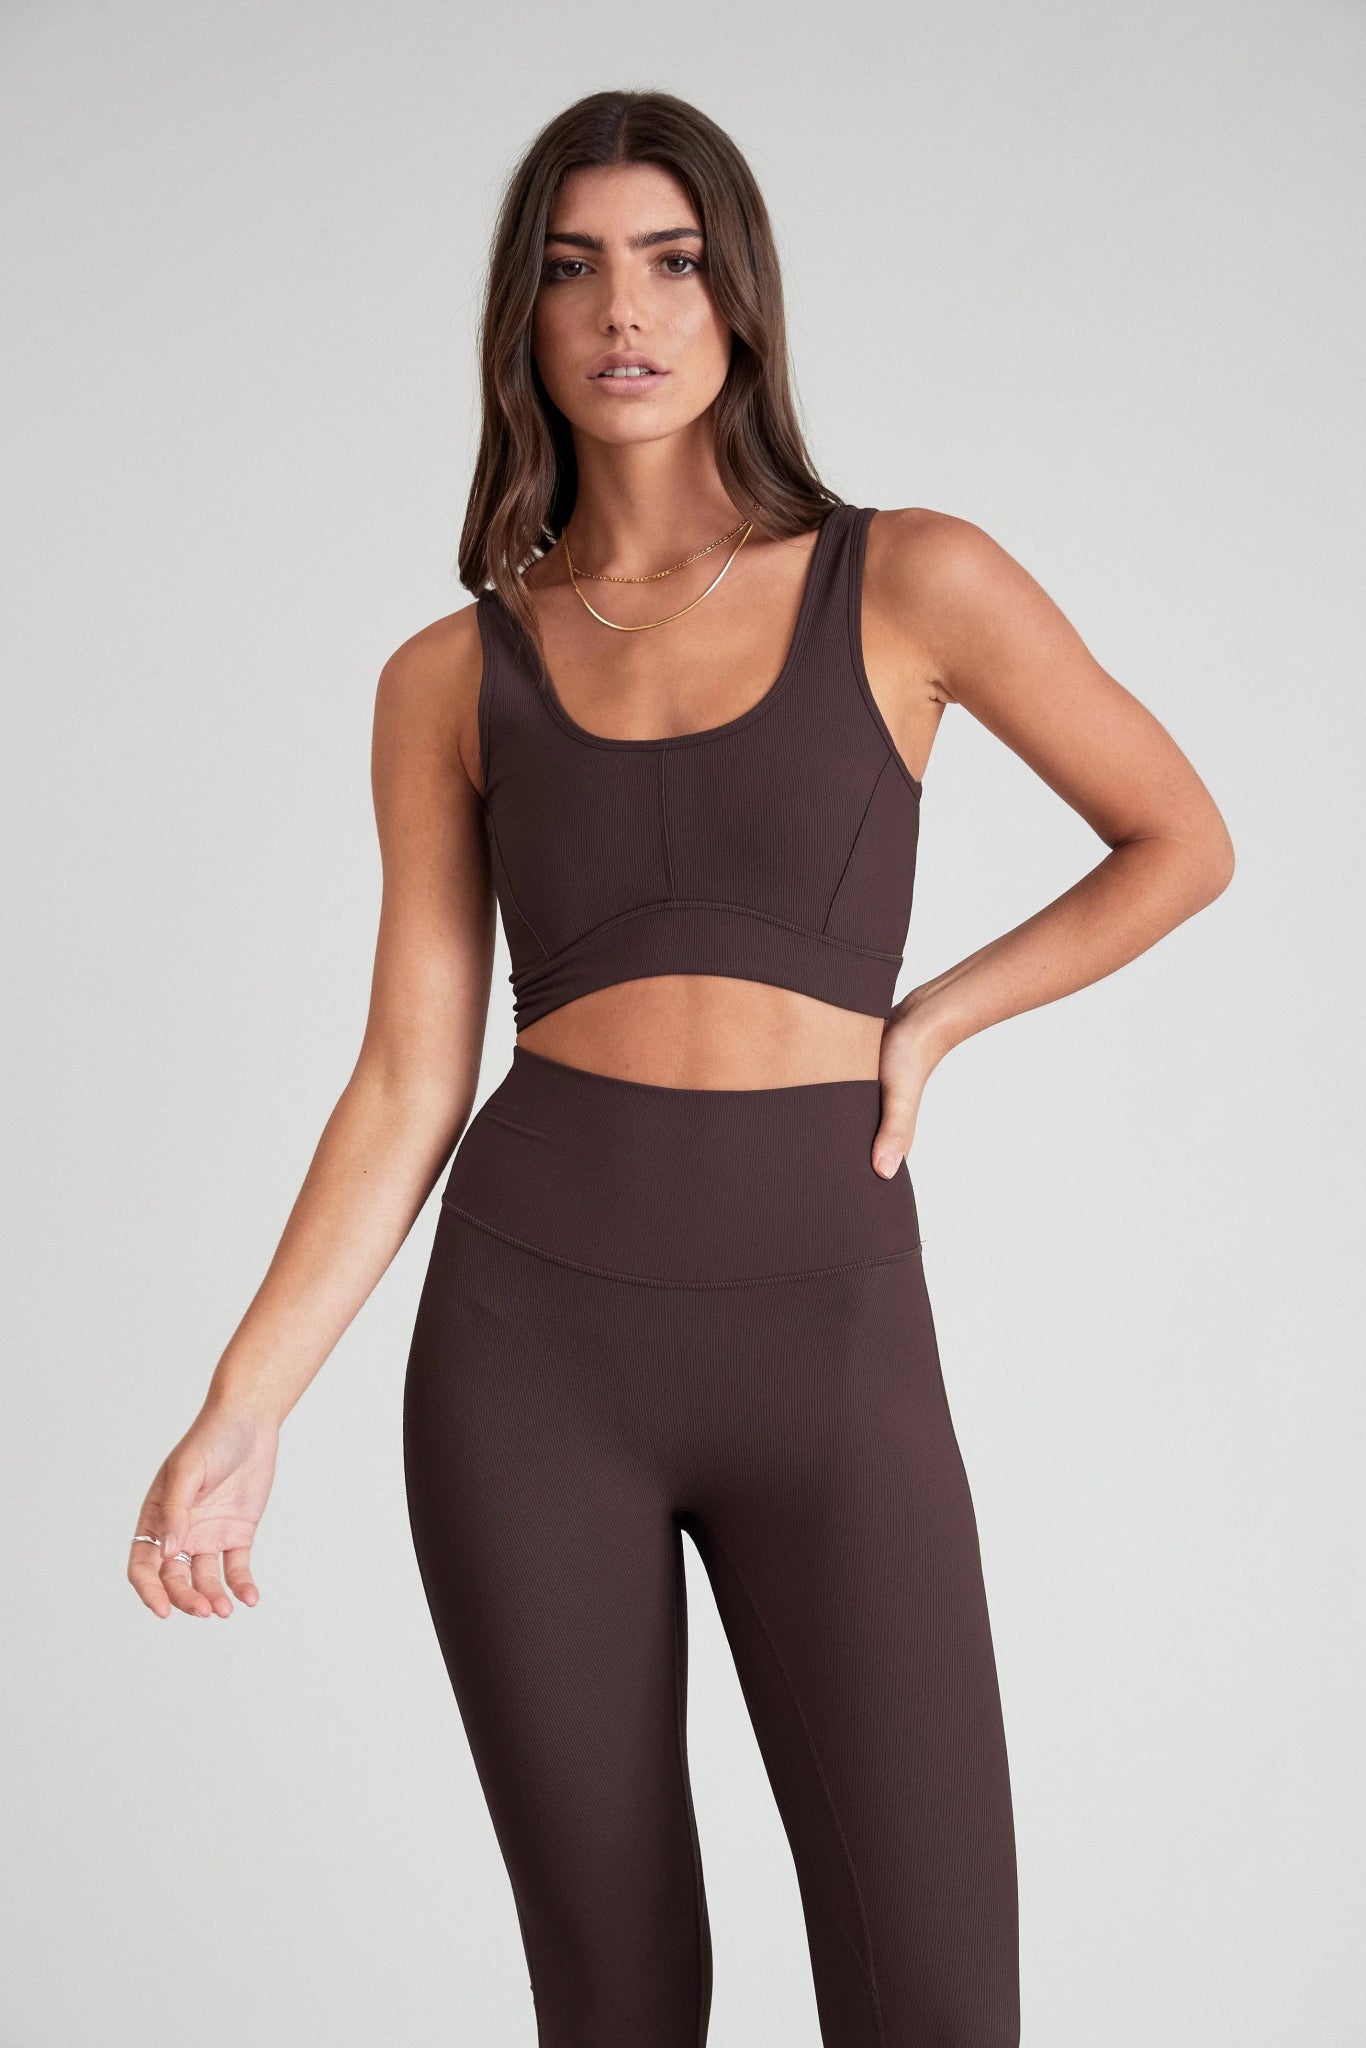 Sports Bras - High Support, Push Up, and More